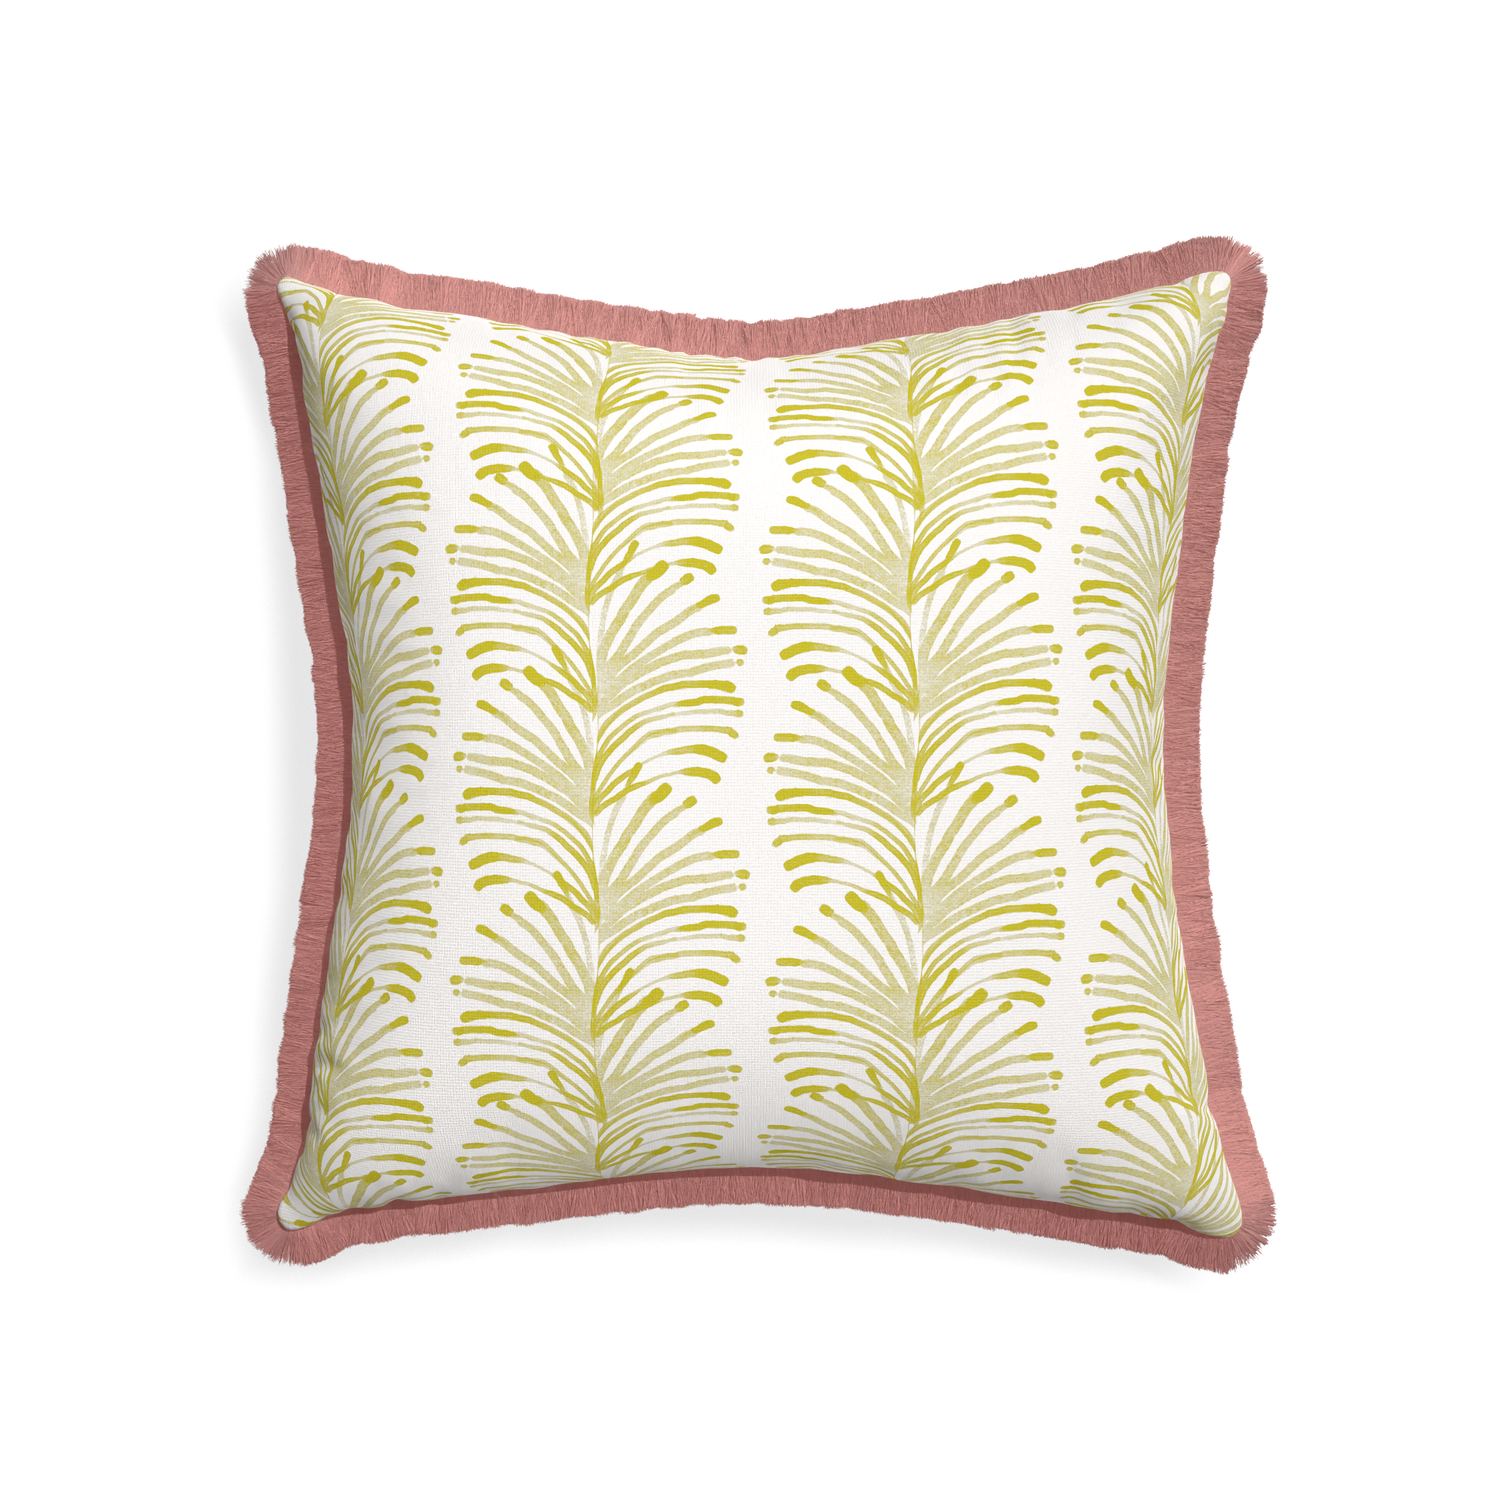 22-square emma chartreuse custom pillow with d fringe on white background